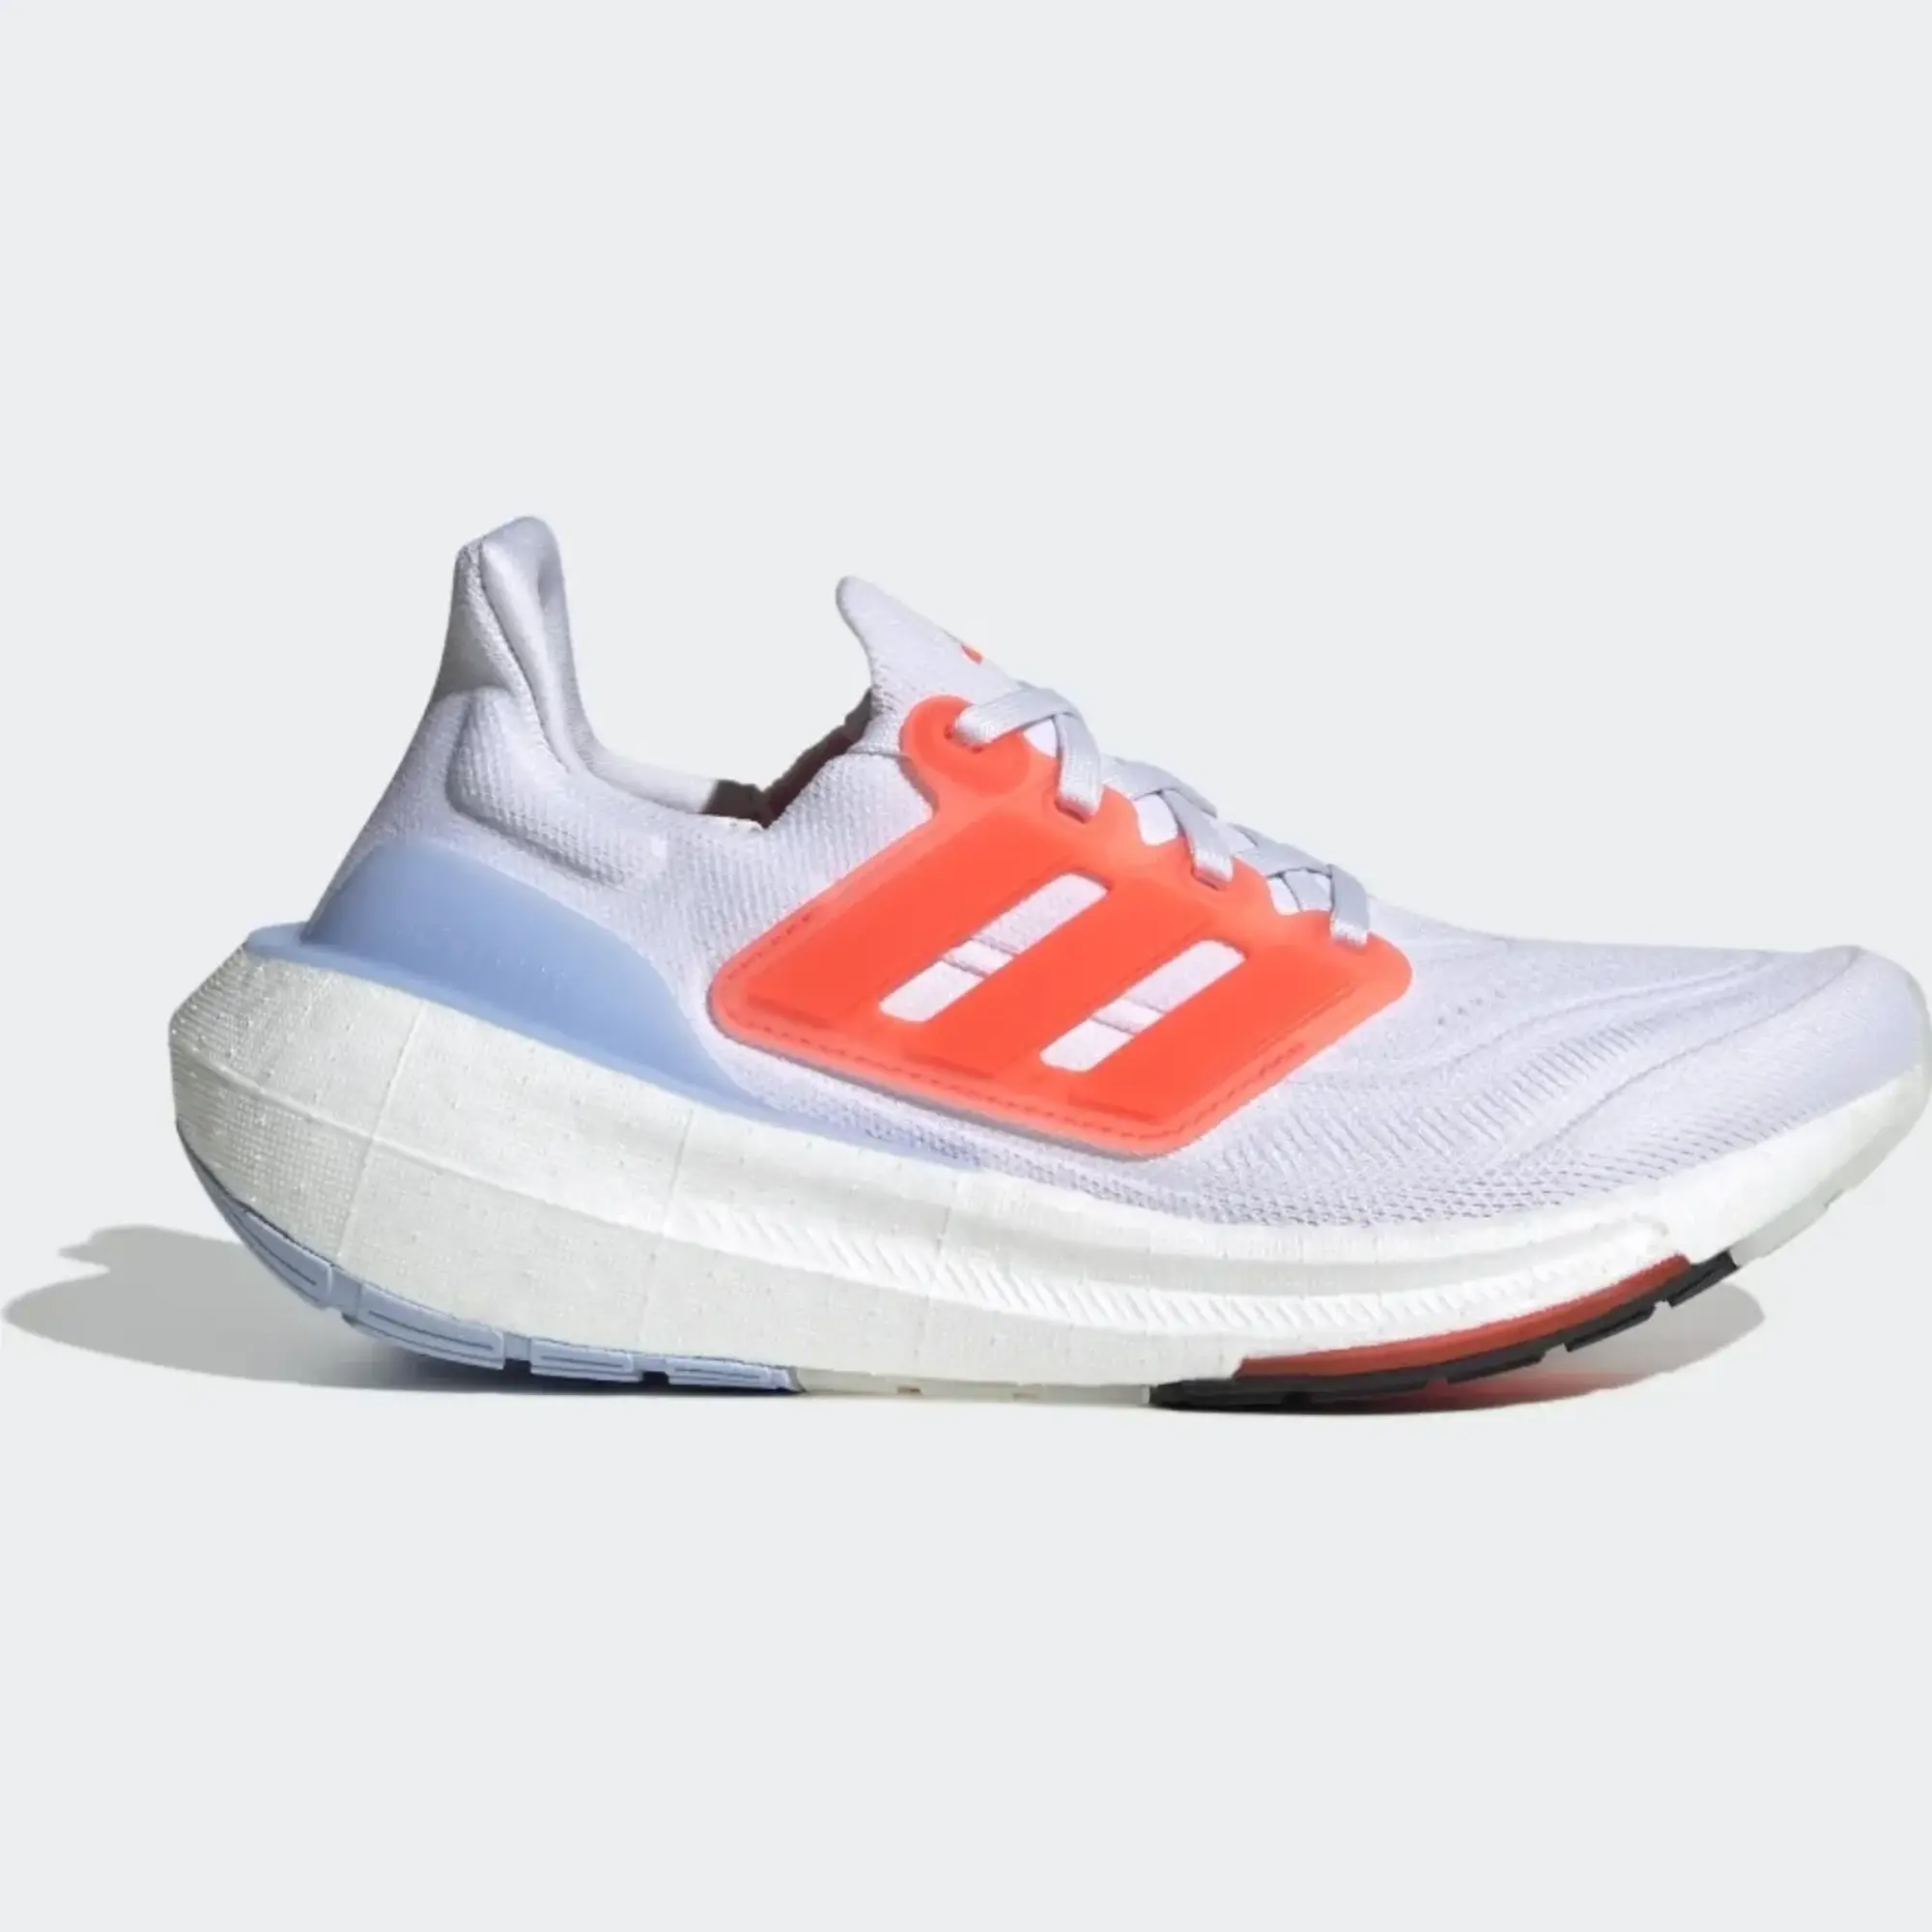 adidas Ultraboost Light Shoes - Cloud White / Solar Red / Solar Red